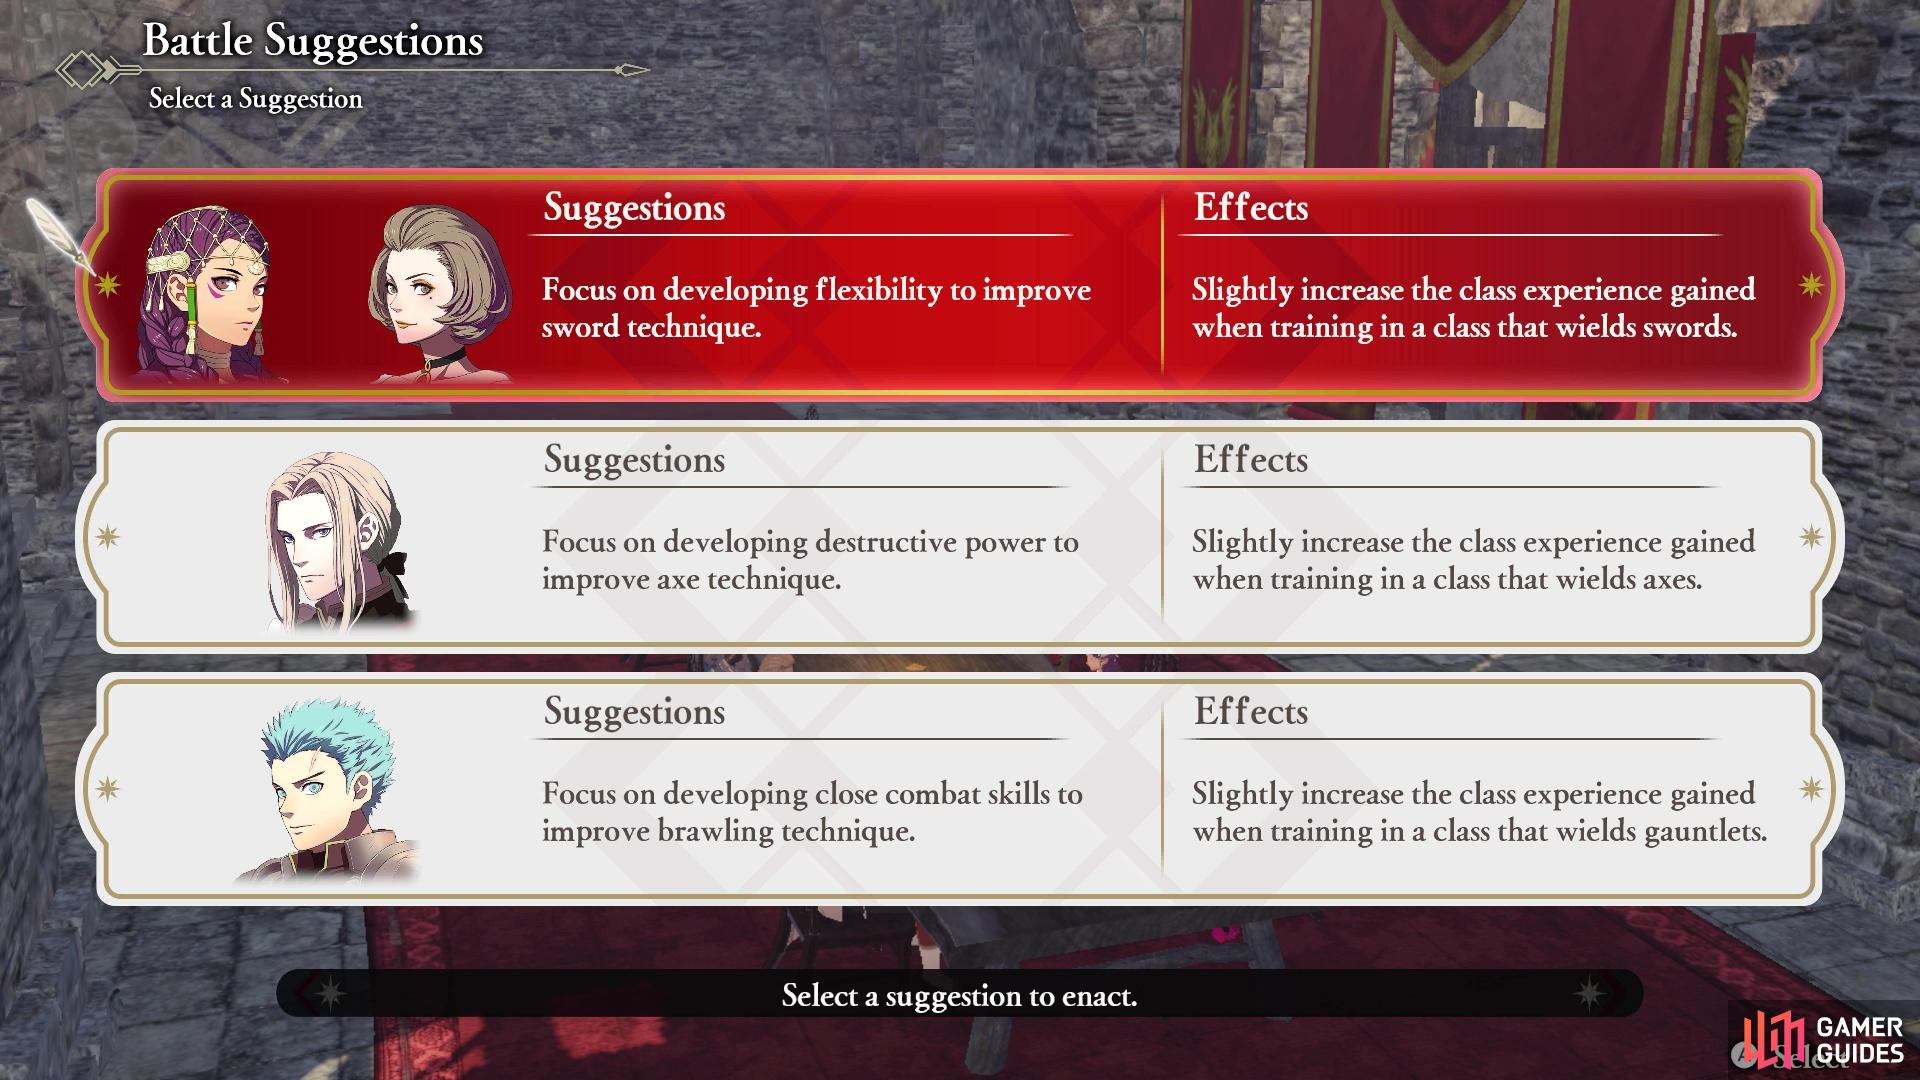 You will see three different Battle Suggestions at the start of each chapter